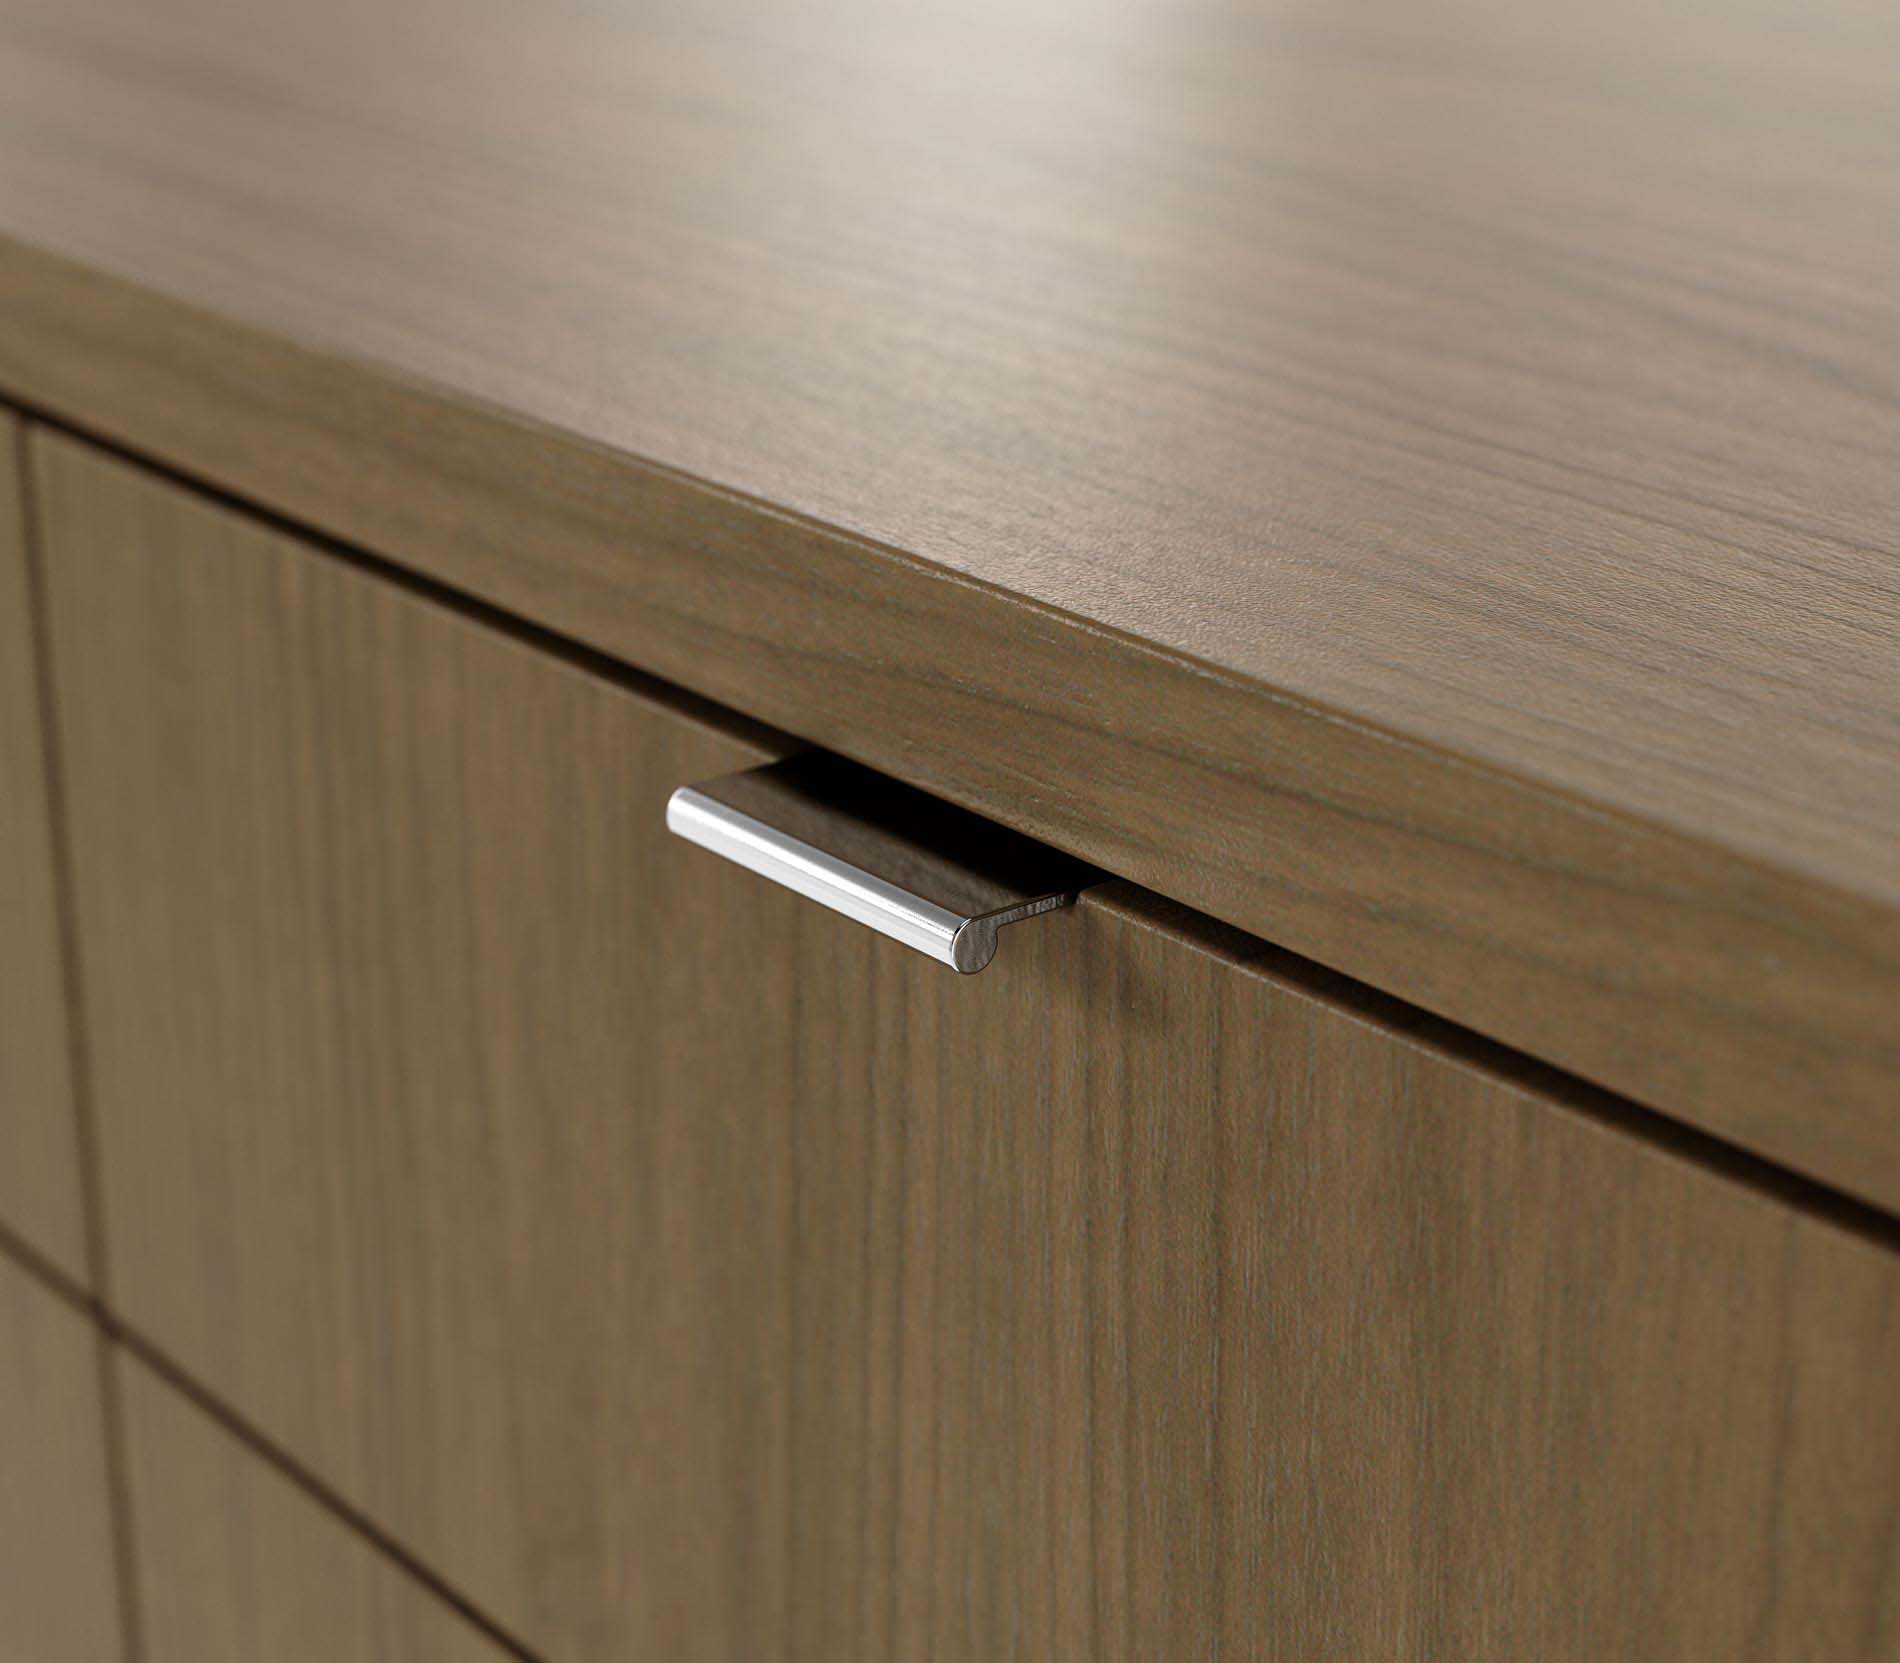 Drawer pull detail on Highline Twenty Five Credenza in natural flat cut walnut with  polished chrome pulls